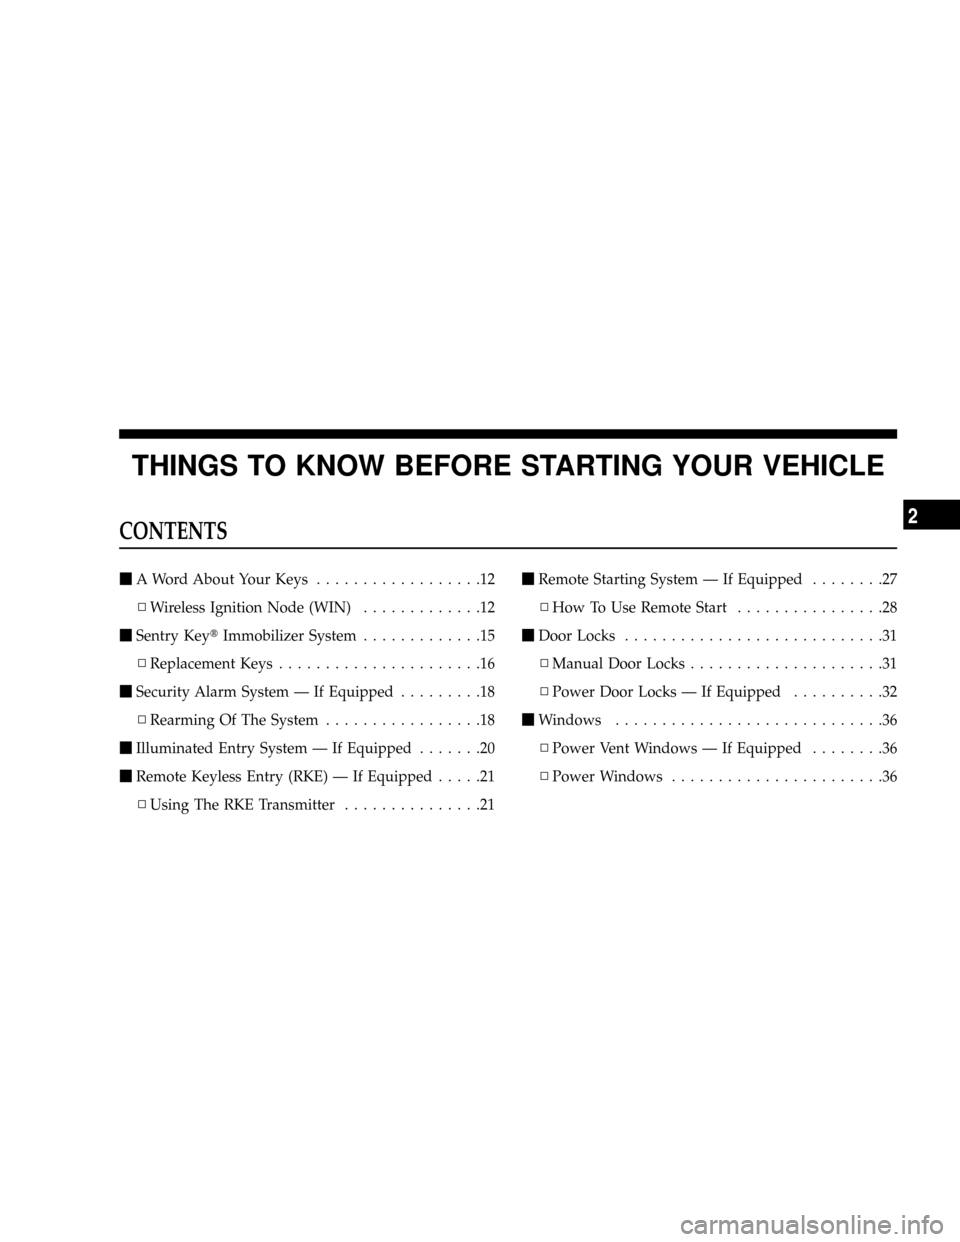 CHRYSLER TOWN AND COUNTRY 2008 5.G User Guide THINGS TO KNOW BEFORE STARTING YOUR VEHICLE
CONTENTS
mA Word About Your Keys..................12
NWireless Ignition Node (WIN).............12
mSentry KeytImmobilizer System.............15
NReplacement